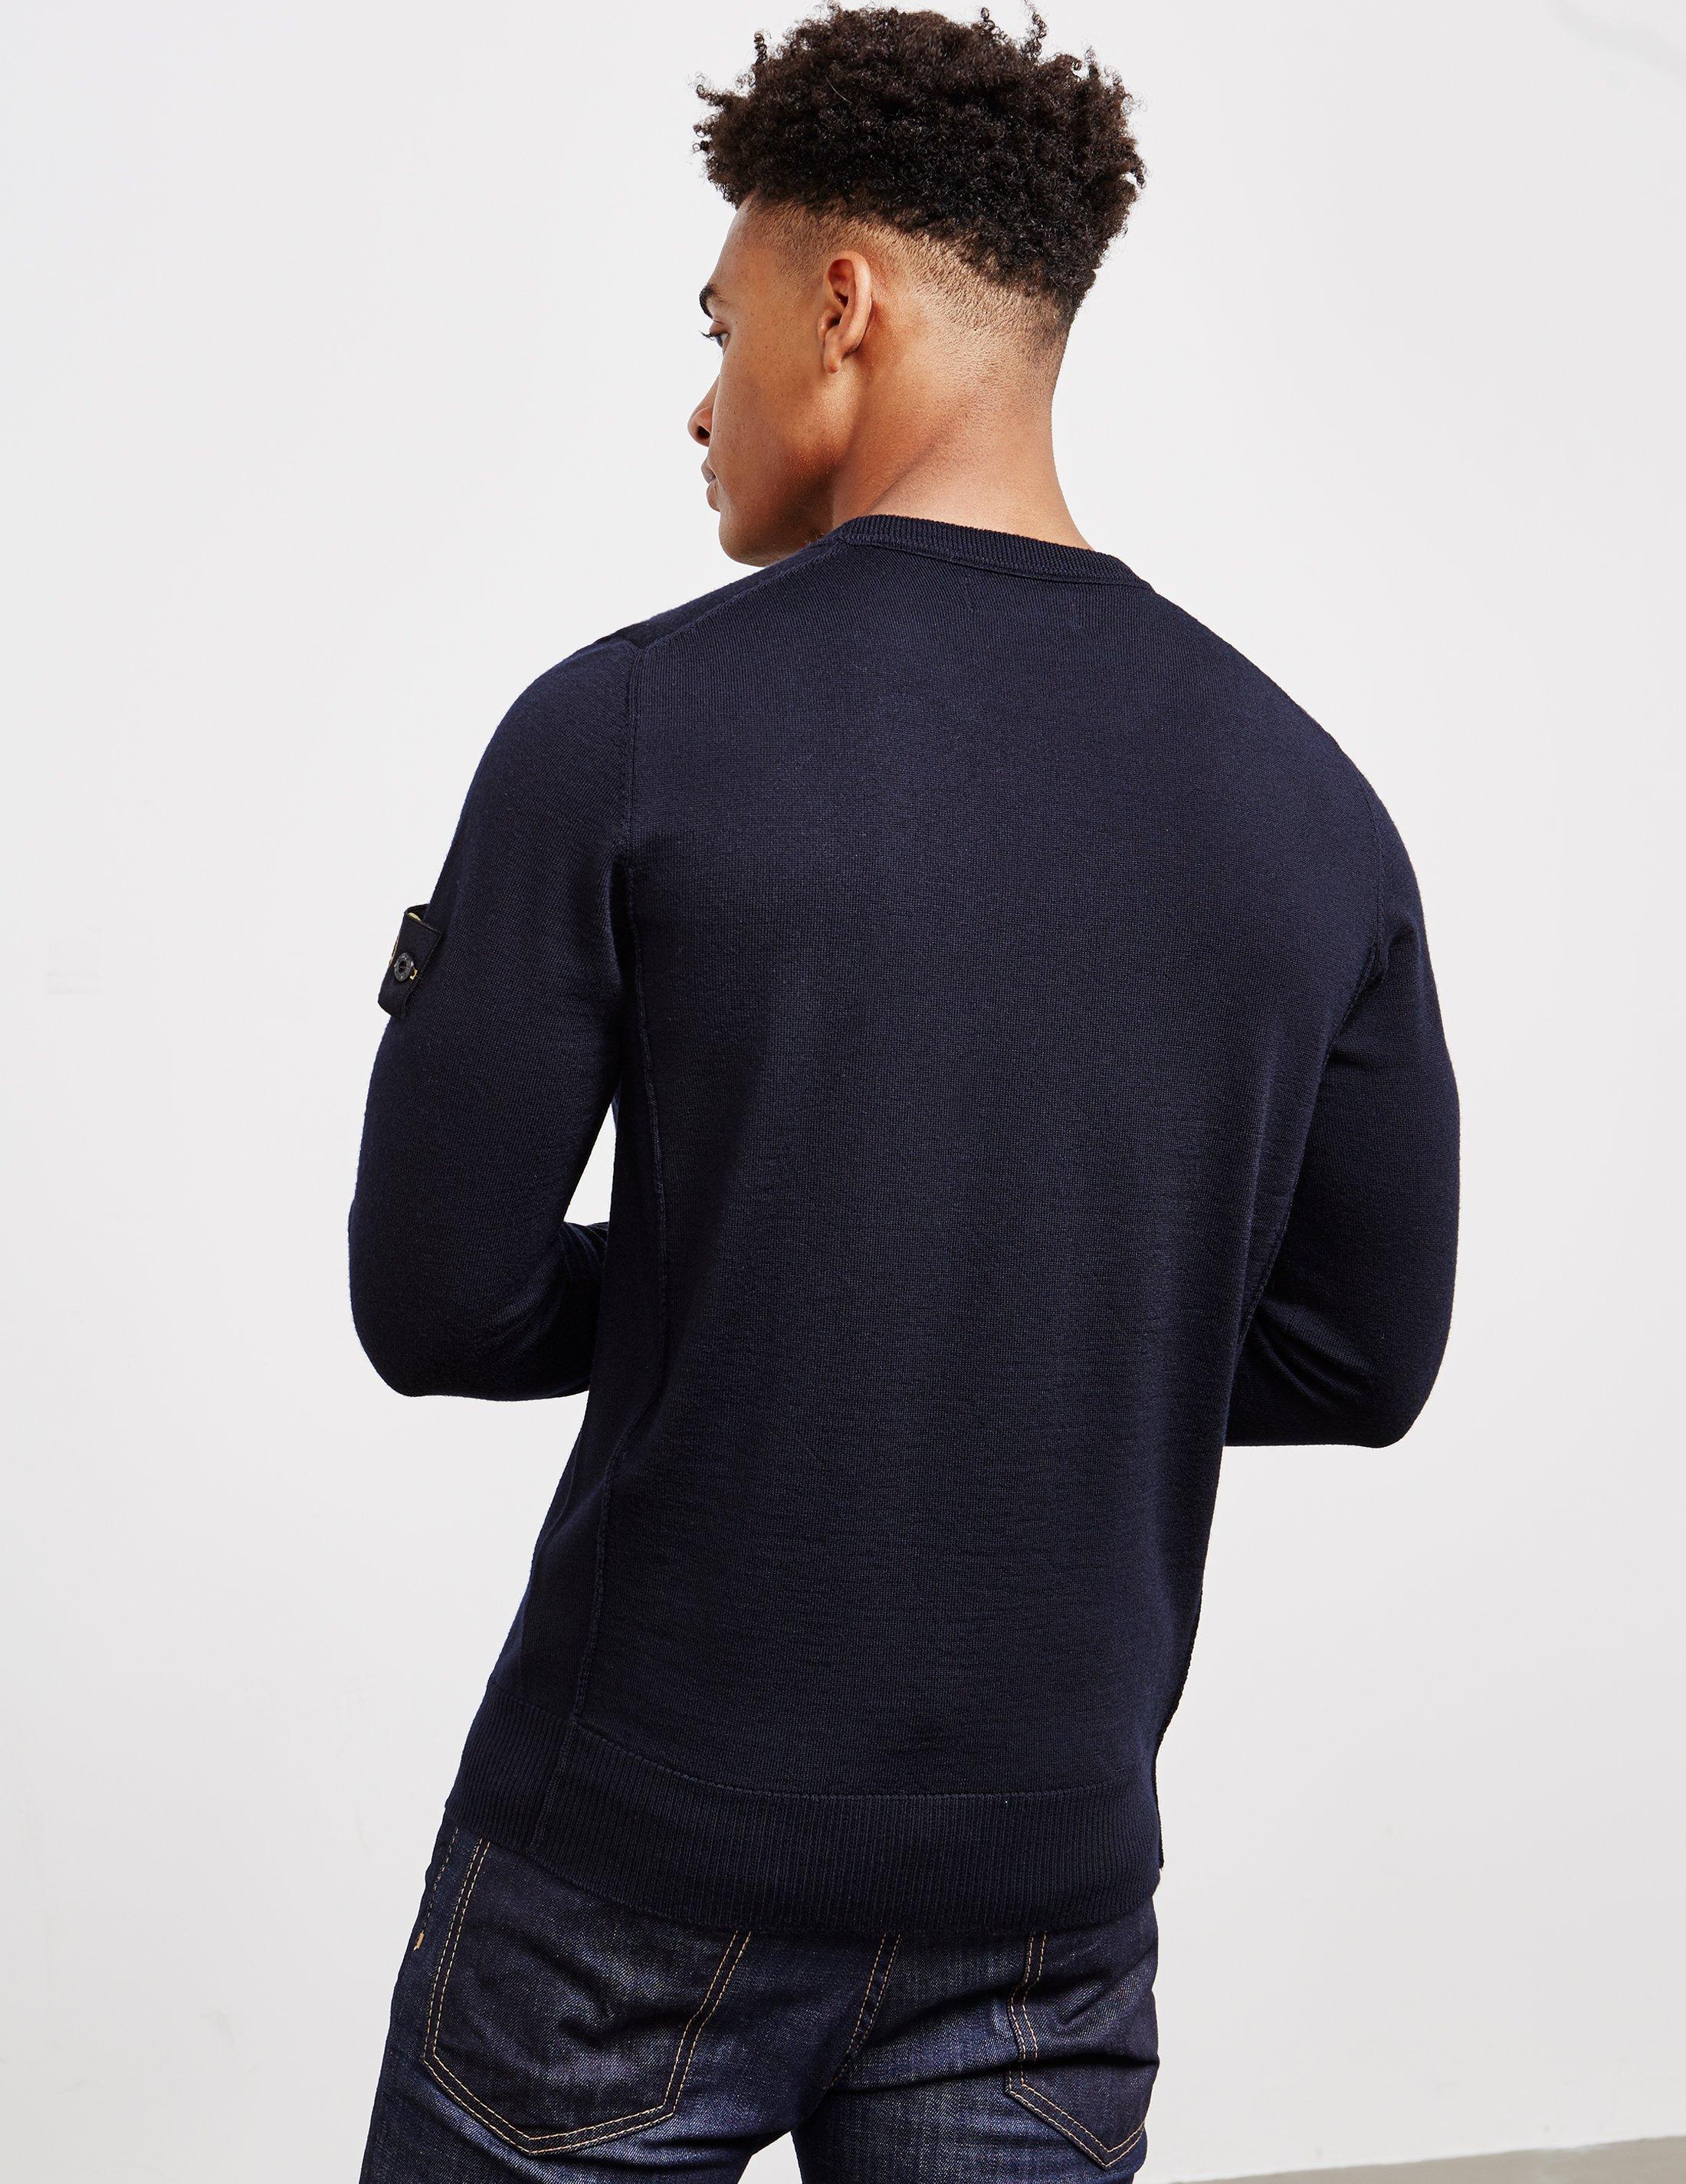 Mens Clothing Sweaters and knitwear Turtlenecks Black for Men Stone Island Navy Cotton Sweater Stone Isla in Blue 